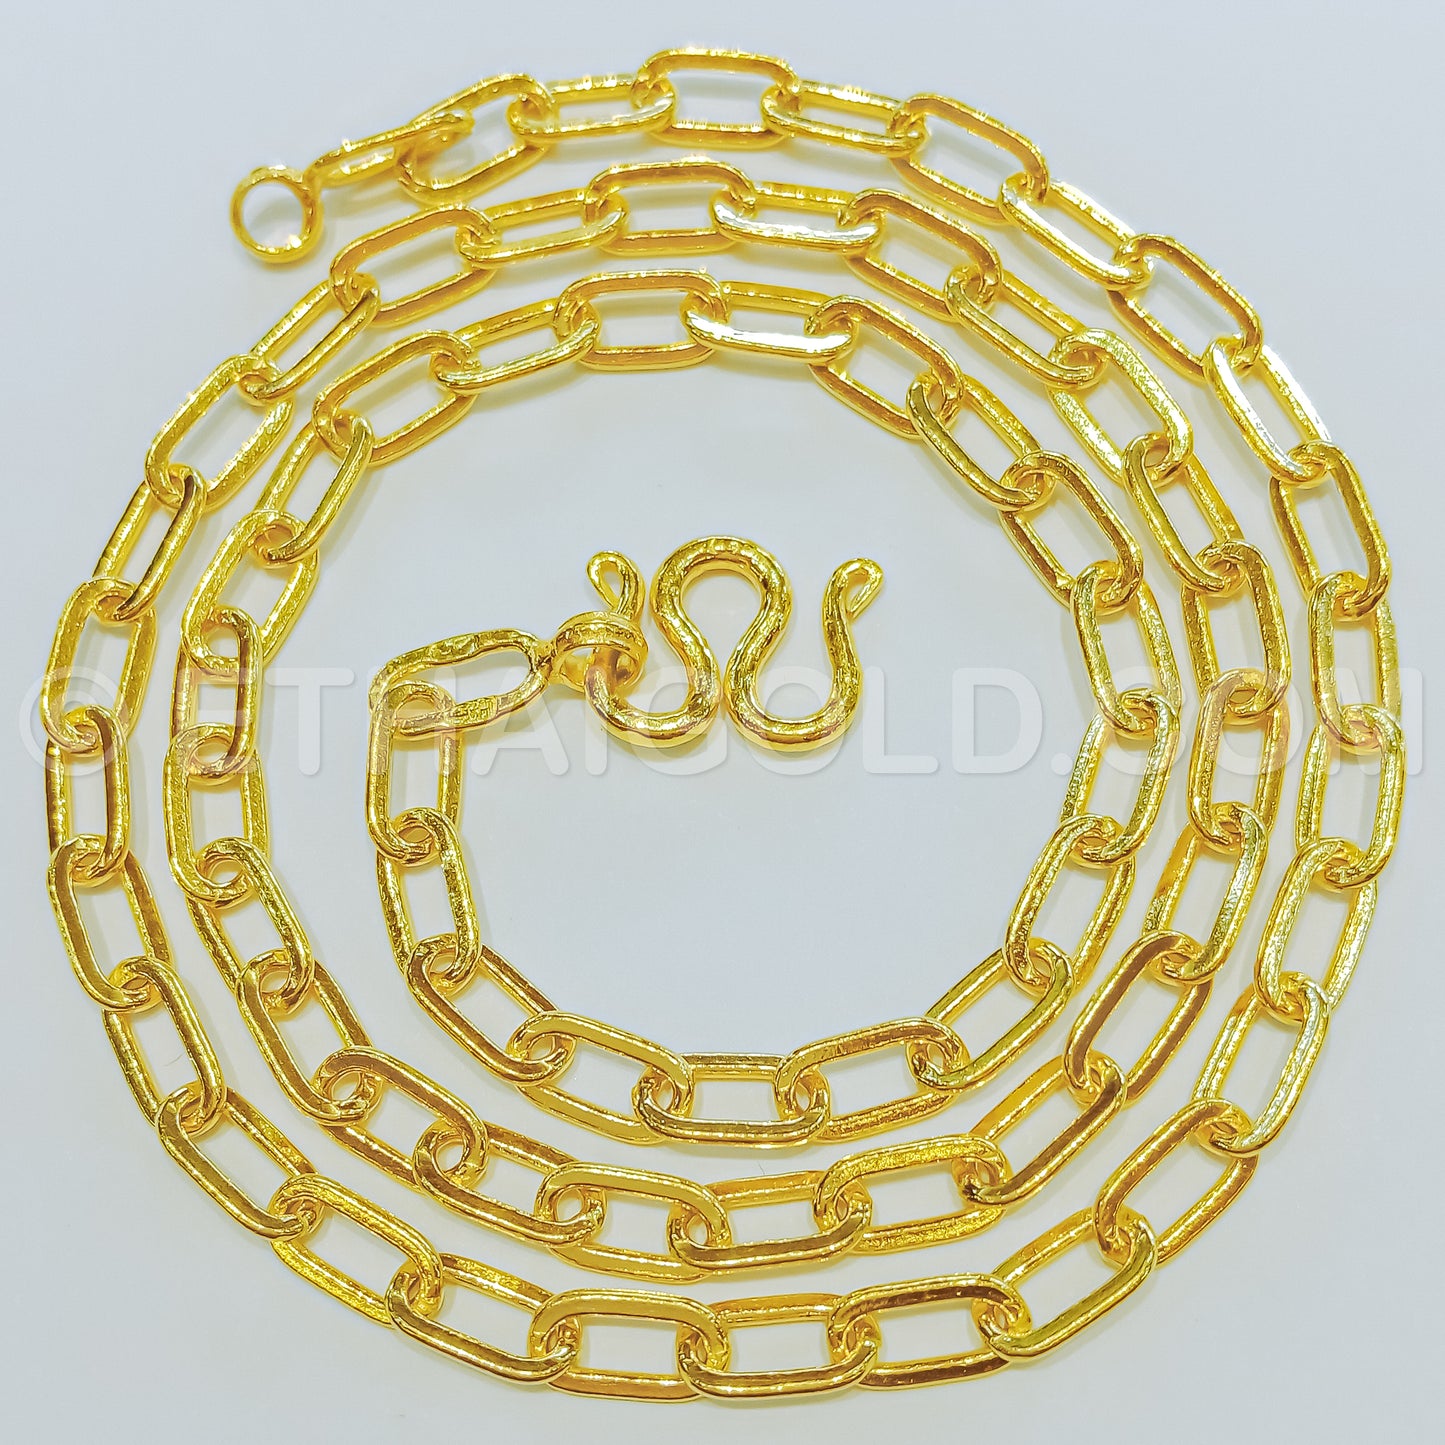 1/2 BAHT POLISHED SOLID LONG FLAT CABLE CHAIN NECKLACE IN 23K GOLD (ID: N0102S)